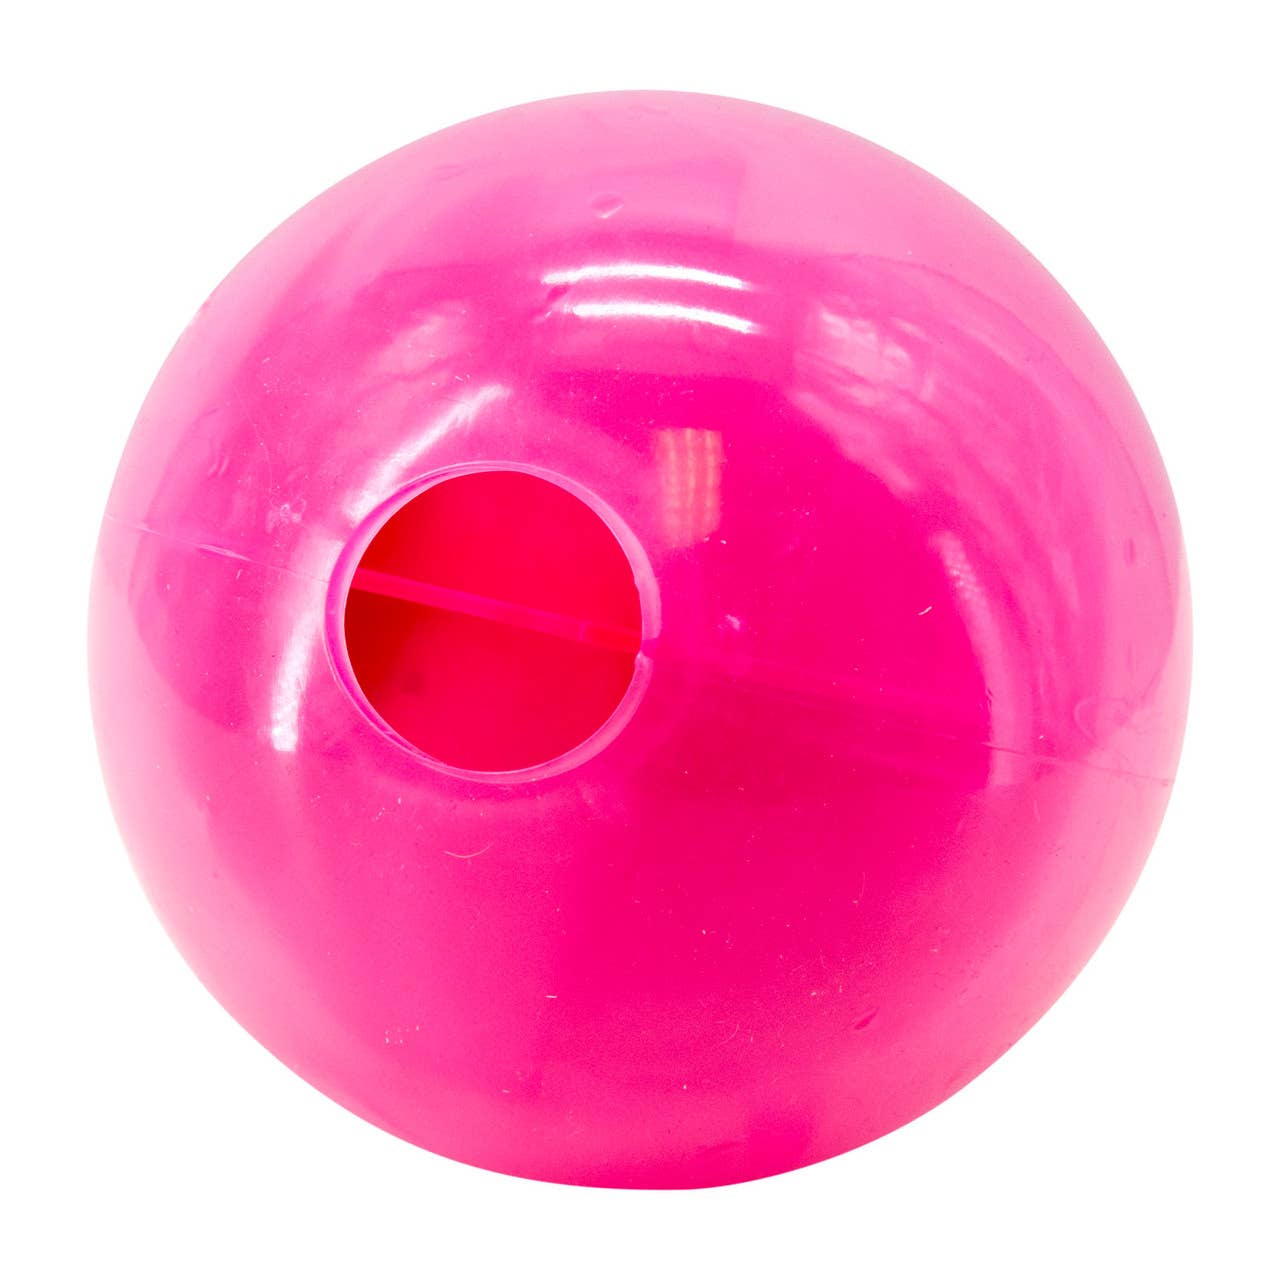 Planet Dog Orbee-Tuff Mazee Interactive Puzzle Dog Toy Pink Raspberry Image